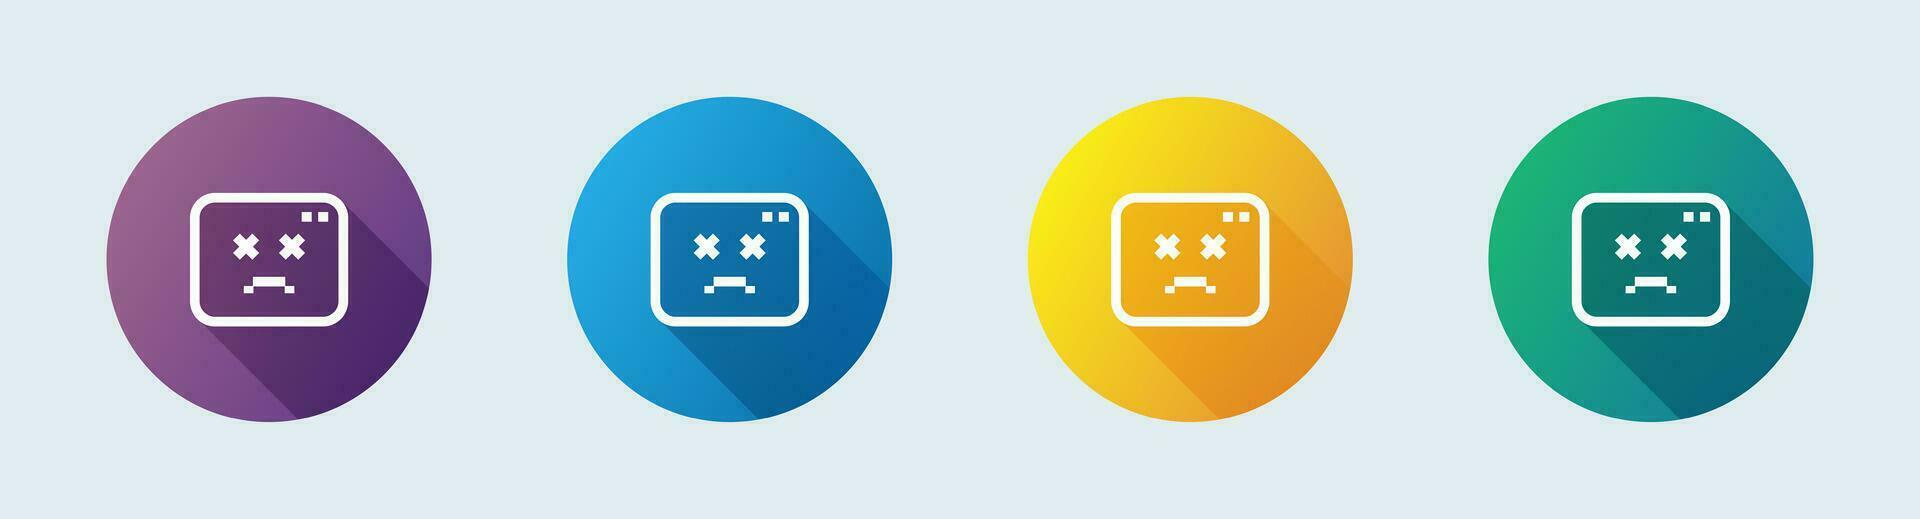 Error line icon in flat design style. Disconnect network signs vector illustration.